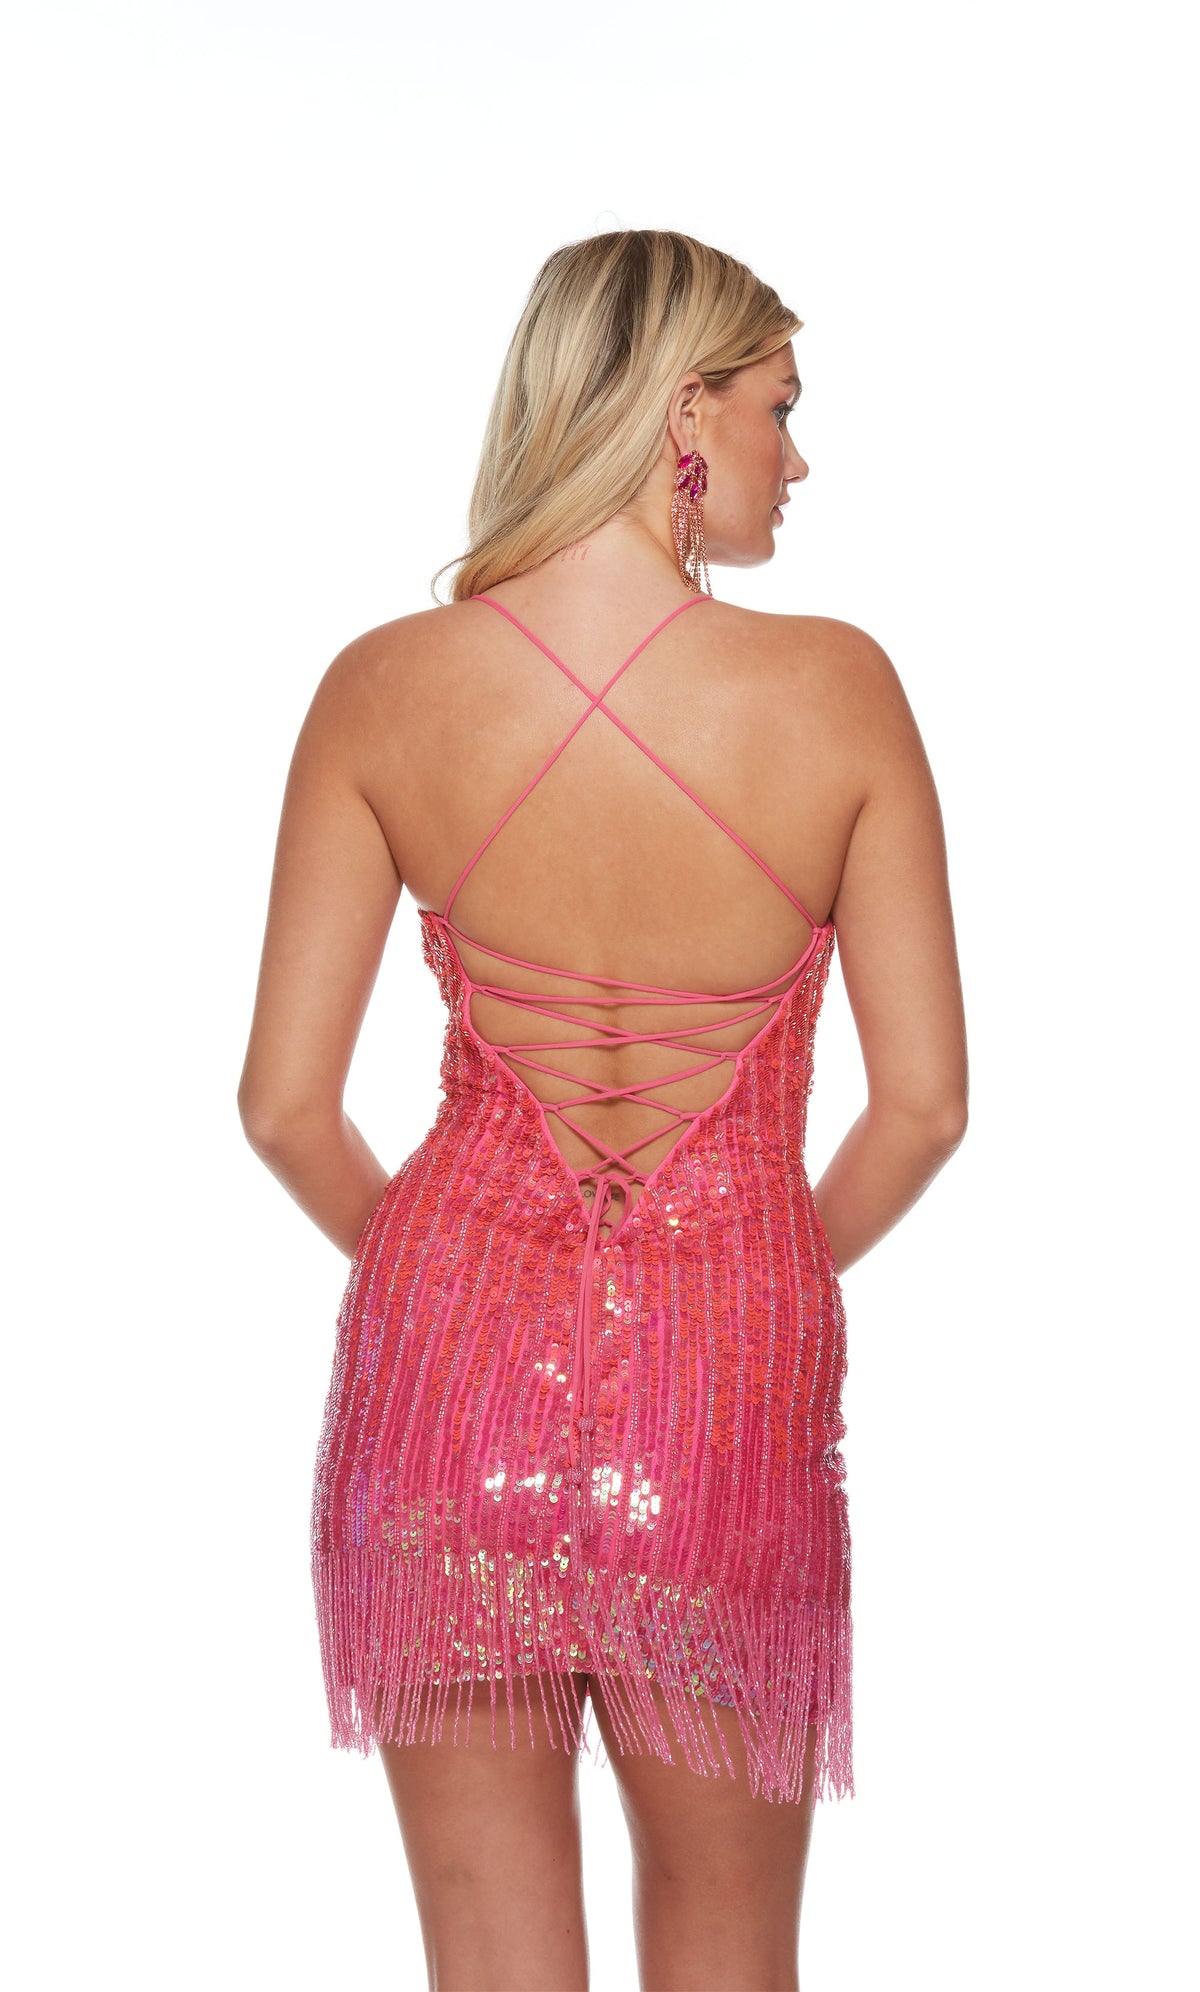 A hand-beaded short formal dress with a lace-up back, shimmery sequins, and beaded fringe, in a delightful light neon pink ombre color.